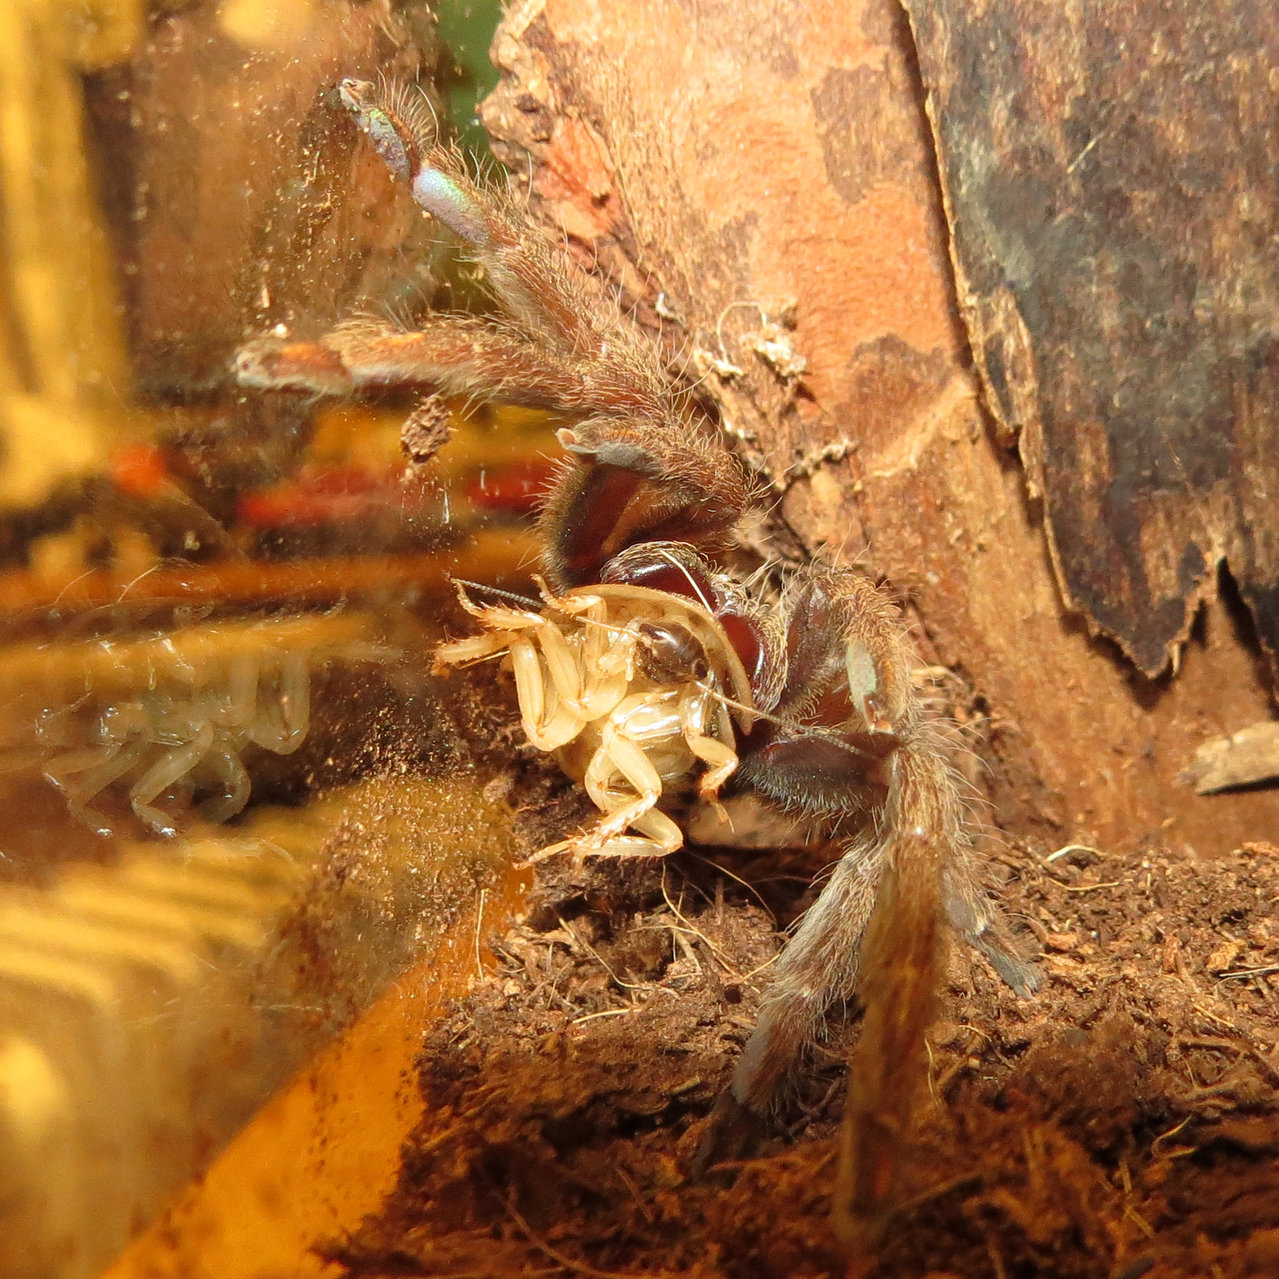 Don't Talk With Your Mouth Full (Psalmopoeus cambridgei)